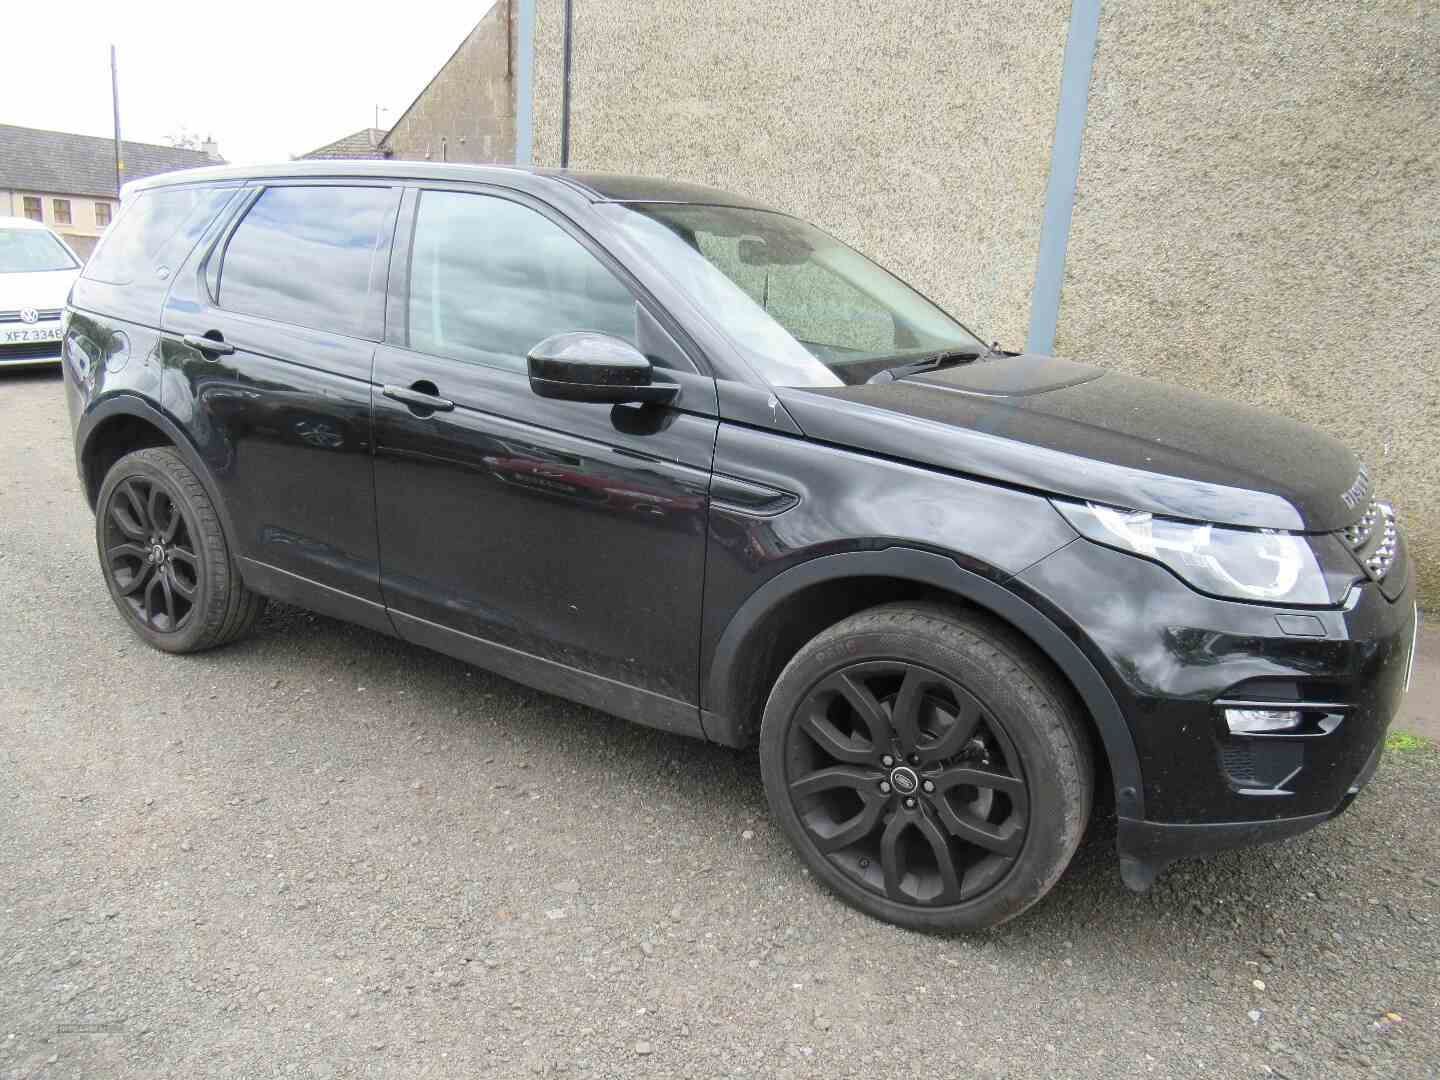 Land Rover, Discovery Sport, 2015, 2.0 TD4 180 SE Tech 5dr Auto. Full Service History, Panoramic Sunroof, 7 Seats